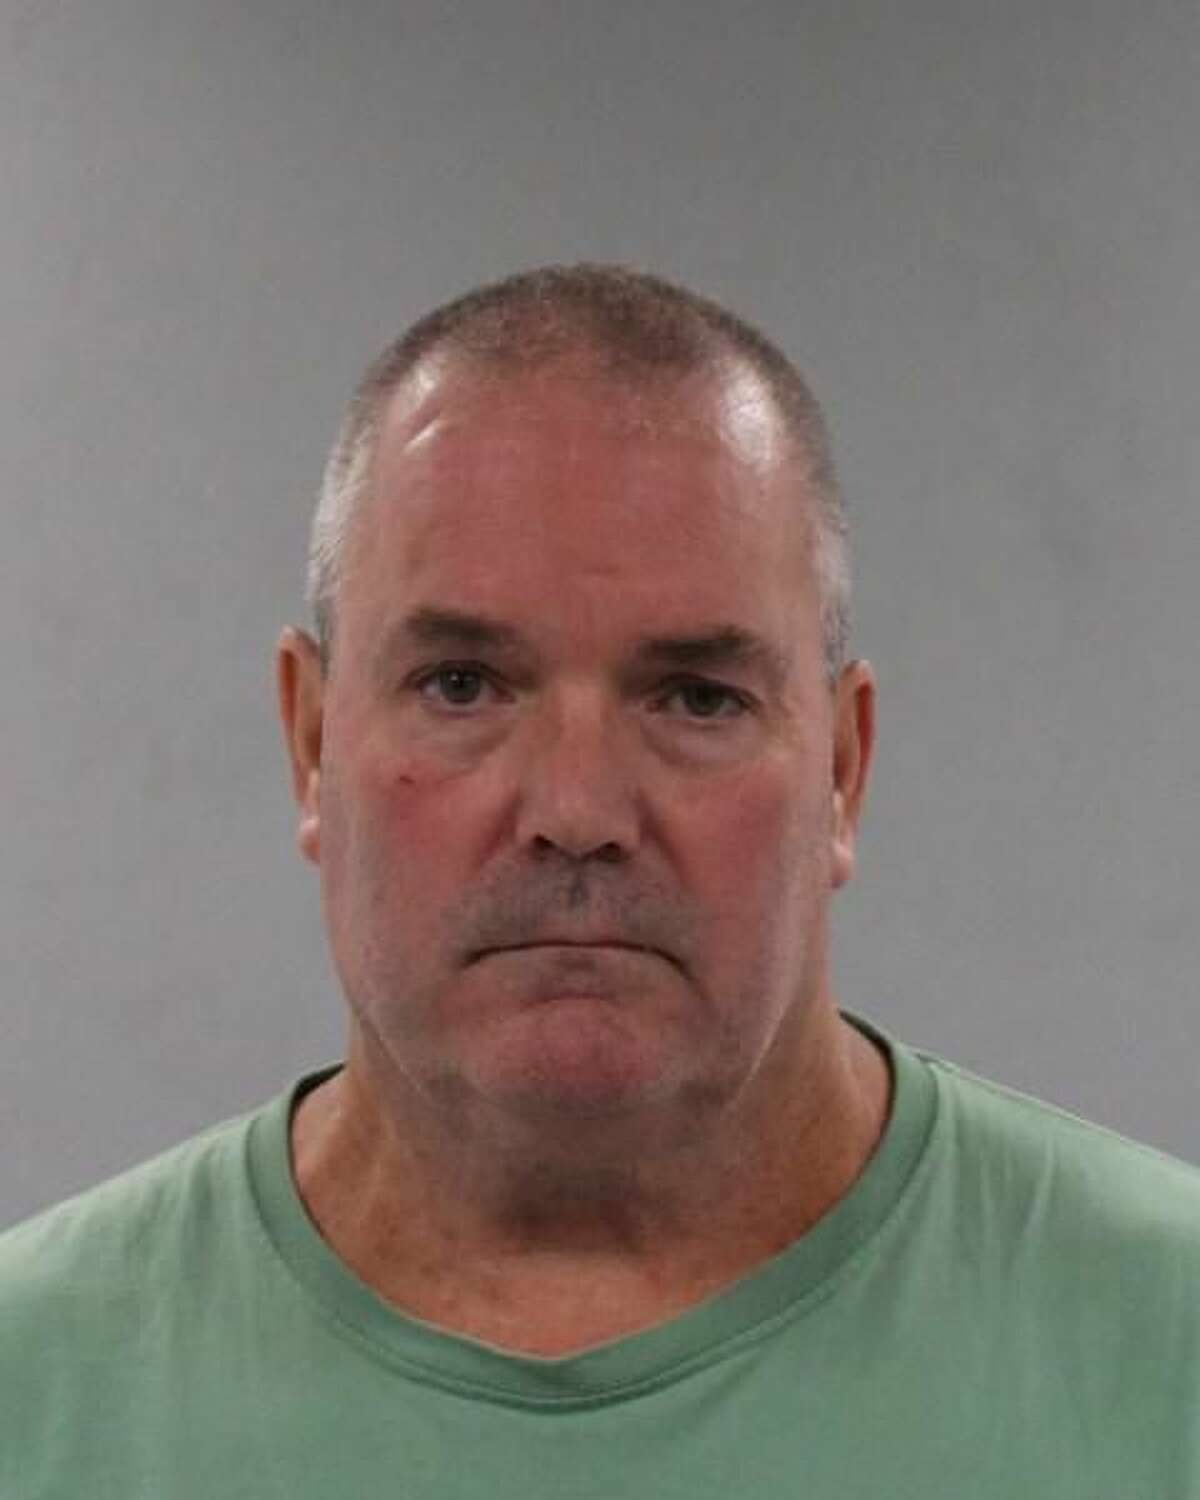 Gregory J. Plaia, 55, of Honey Hill in Canaan, Conn., was charged with second-degree threatening and second-degree breach of peace.